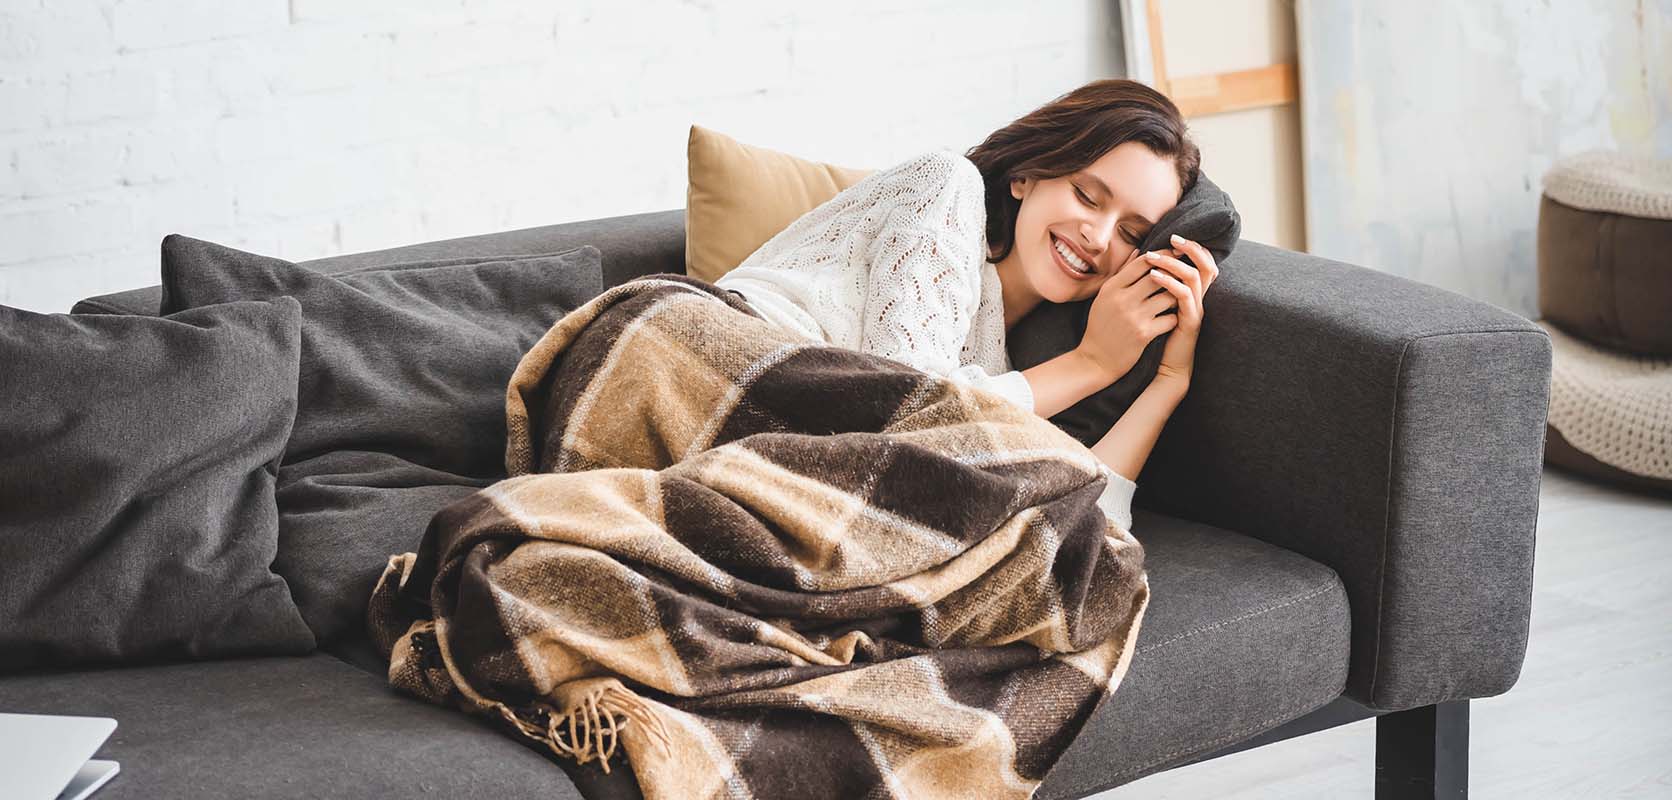 Smiling lady sleeping soundly on her sofa at home after buying Garlic Cookies strain weed online from West Coast Cannabis Canada online dispensary.